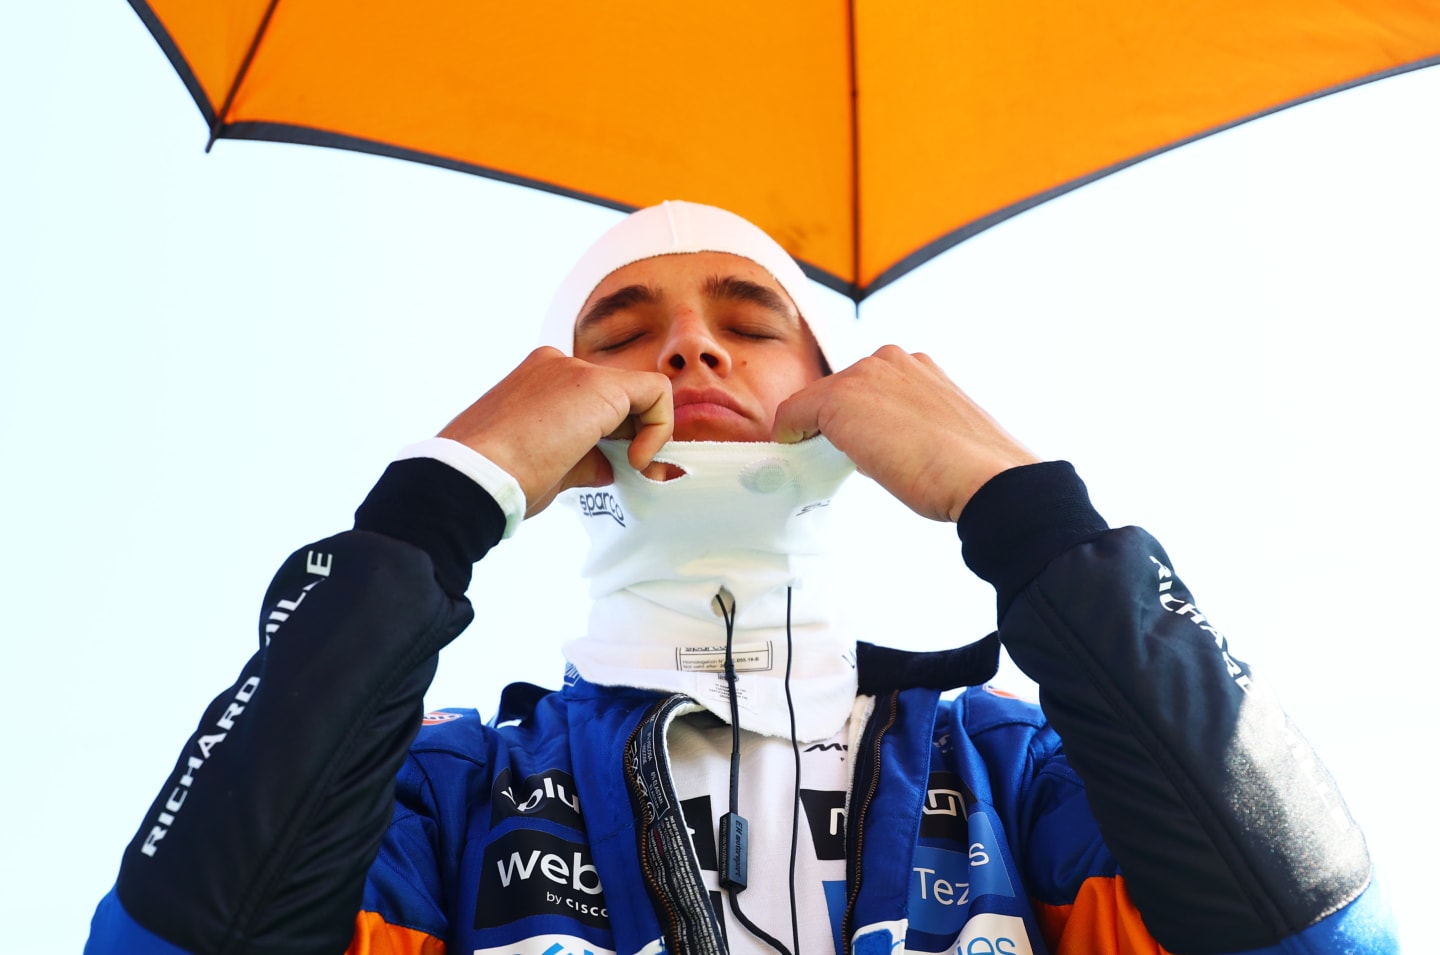 NORTHAMPTON, ENGLAND - JULY 18: Lando Norris of Great Britain and McLaren F1 prepares to drive on